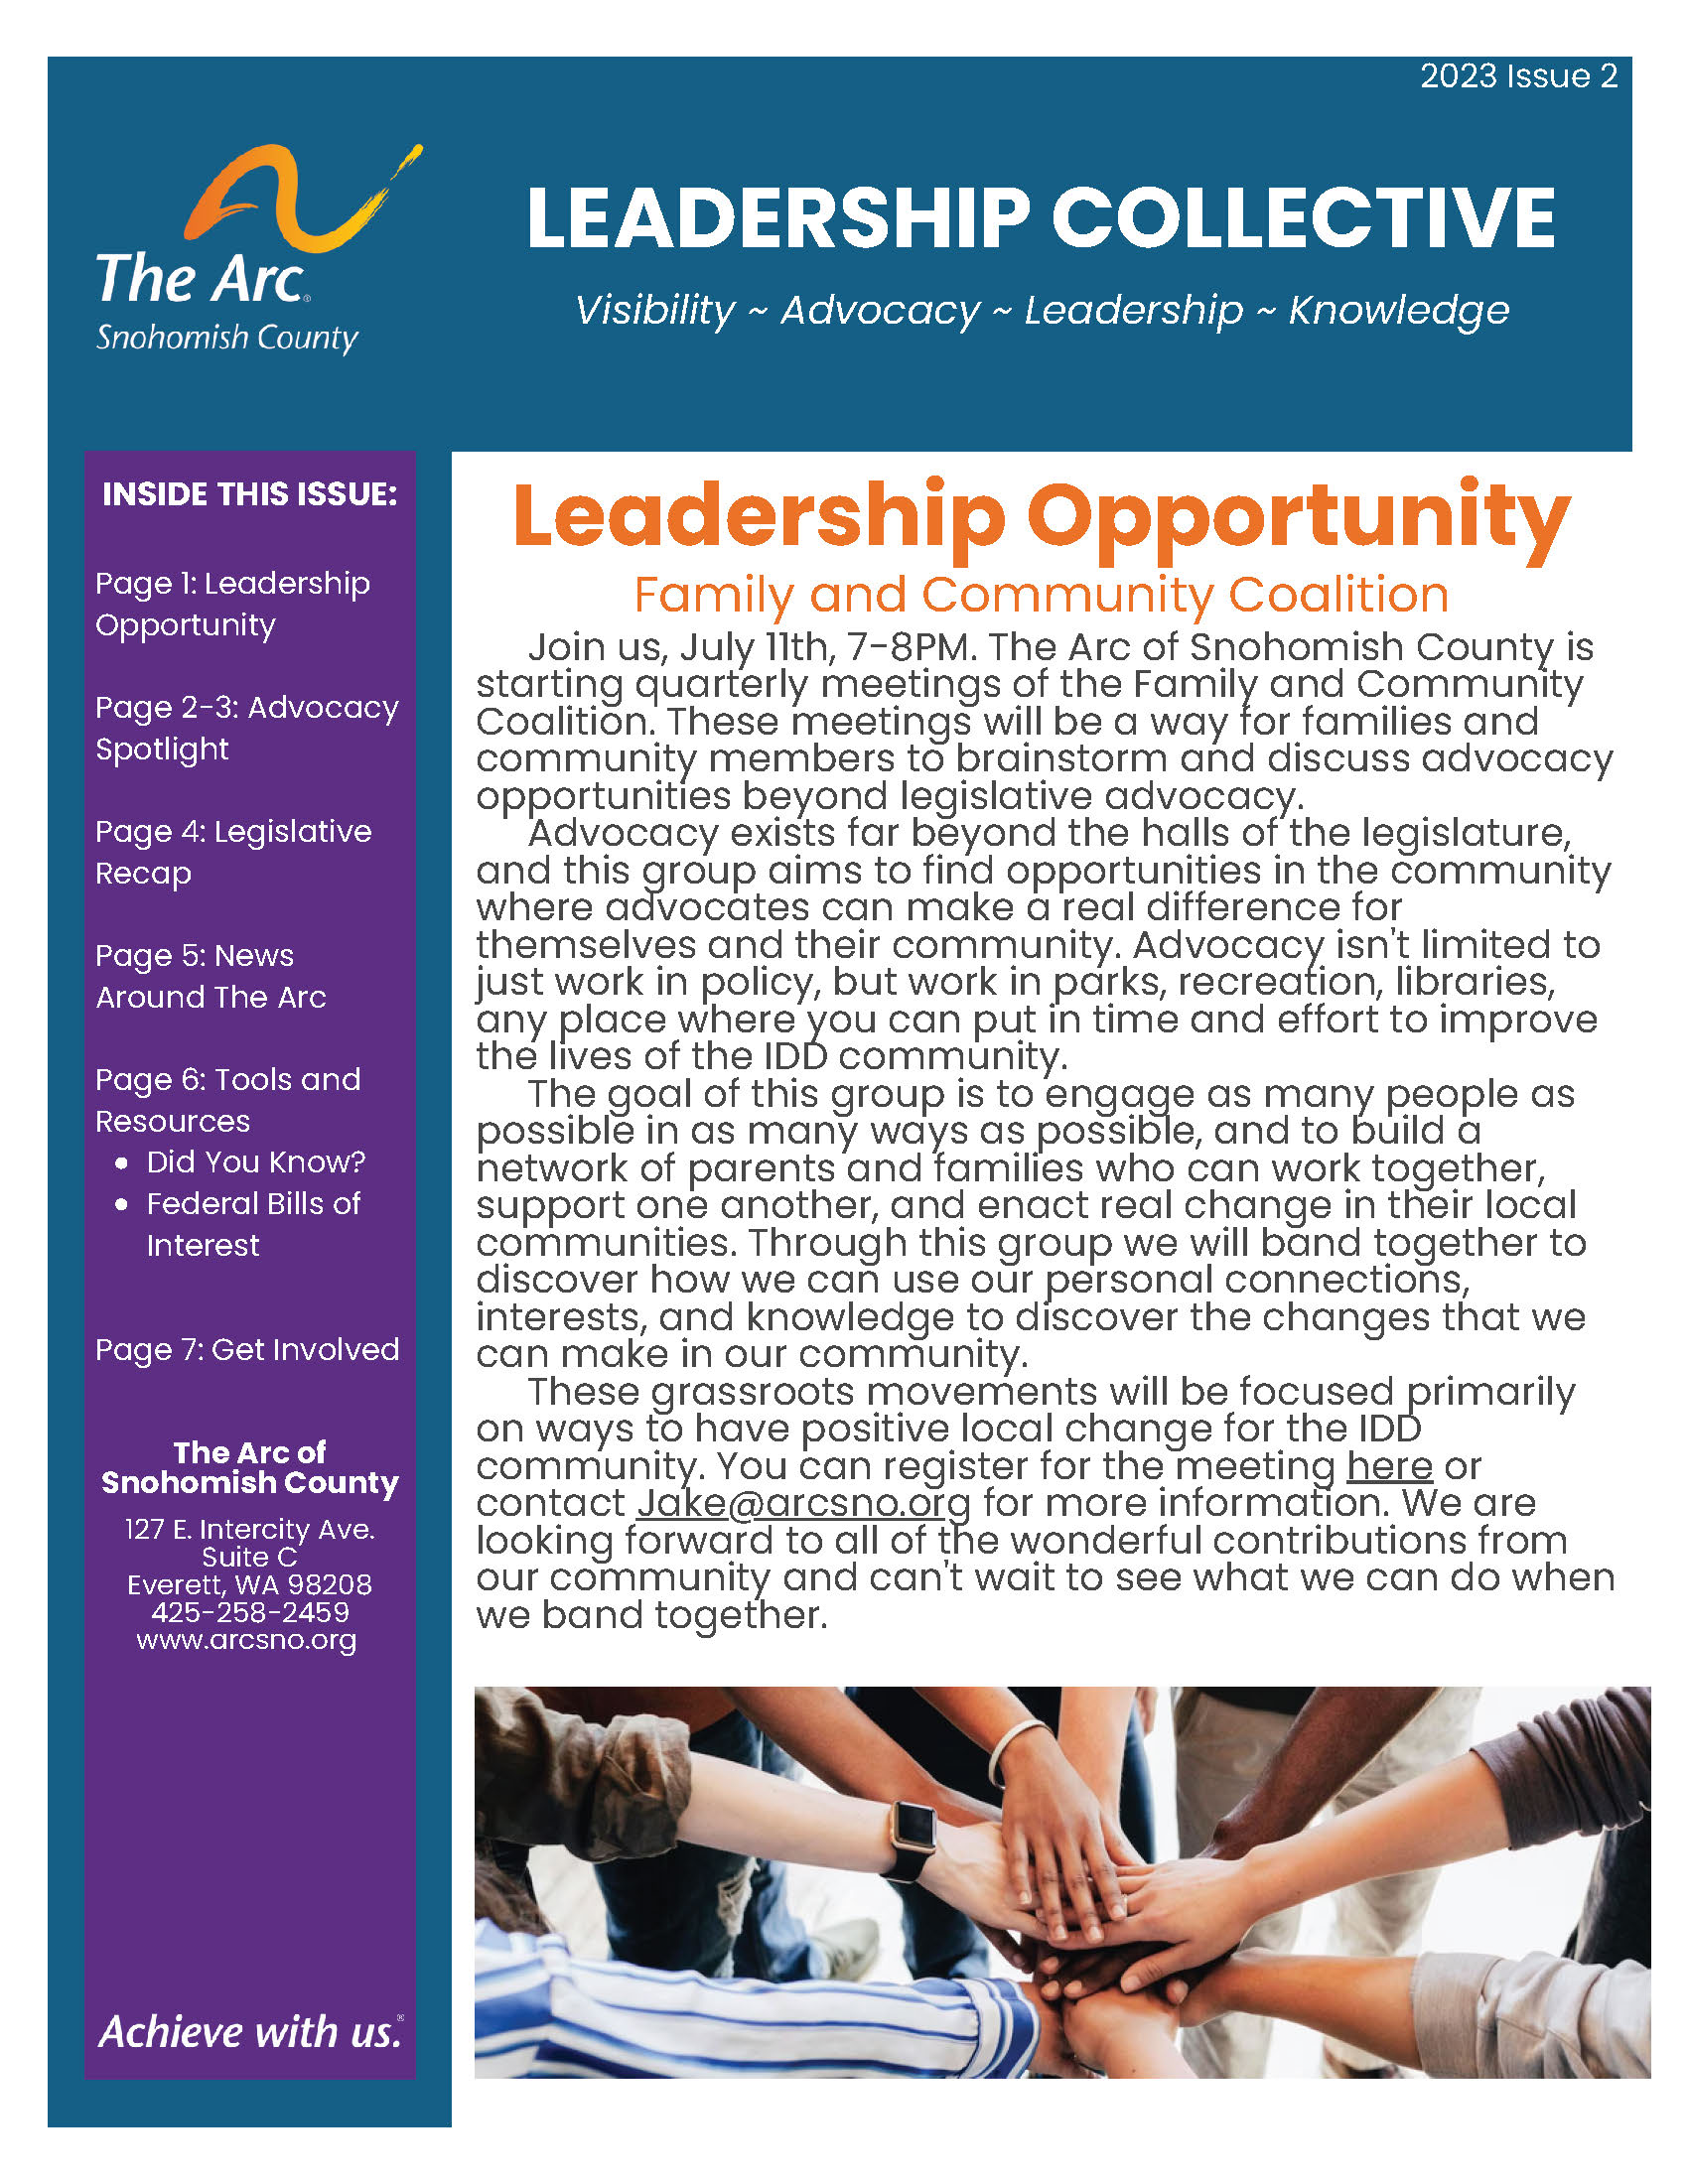 Leadership Collective 2023 issue 2